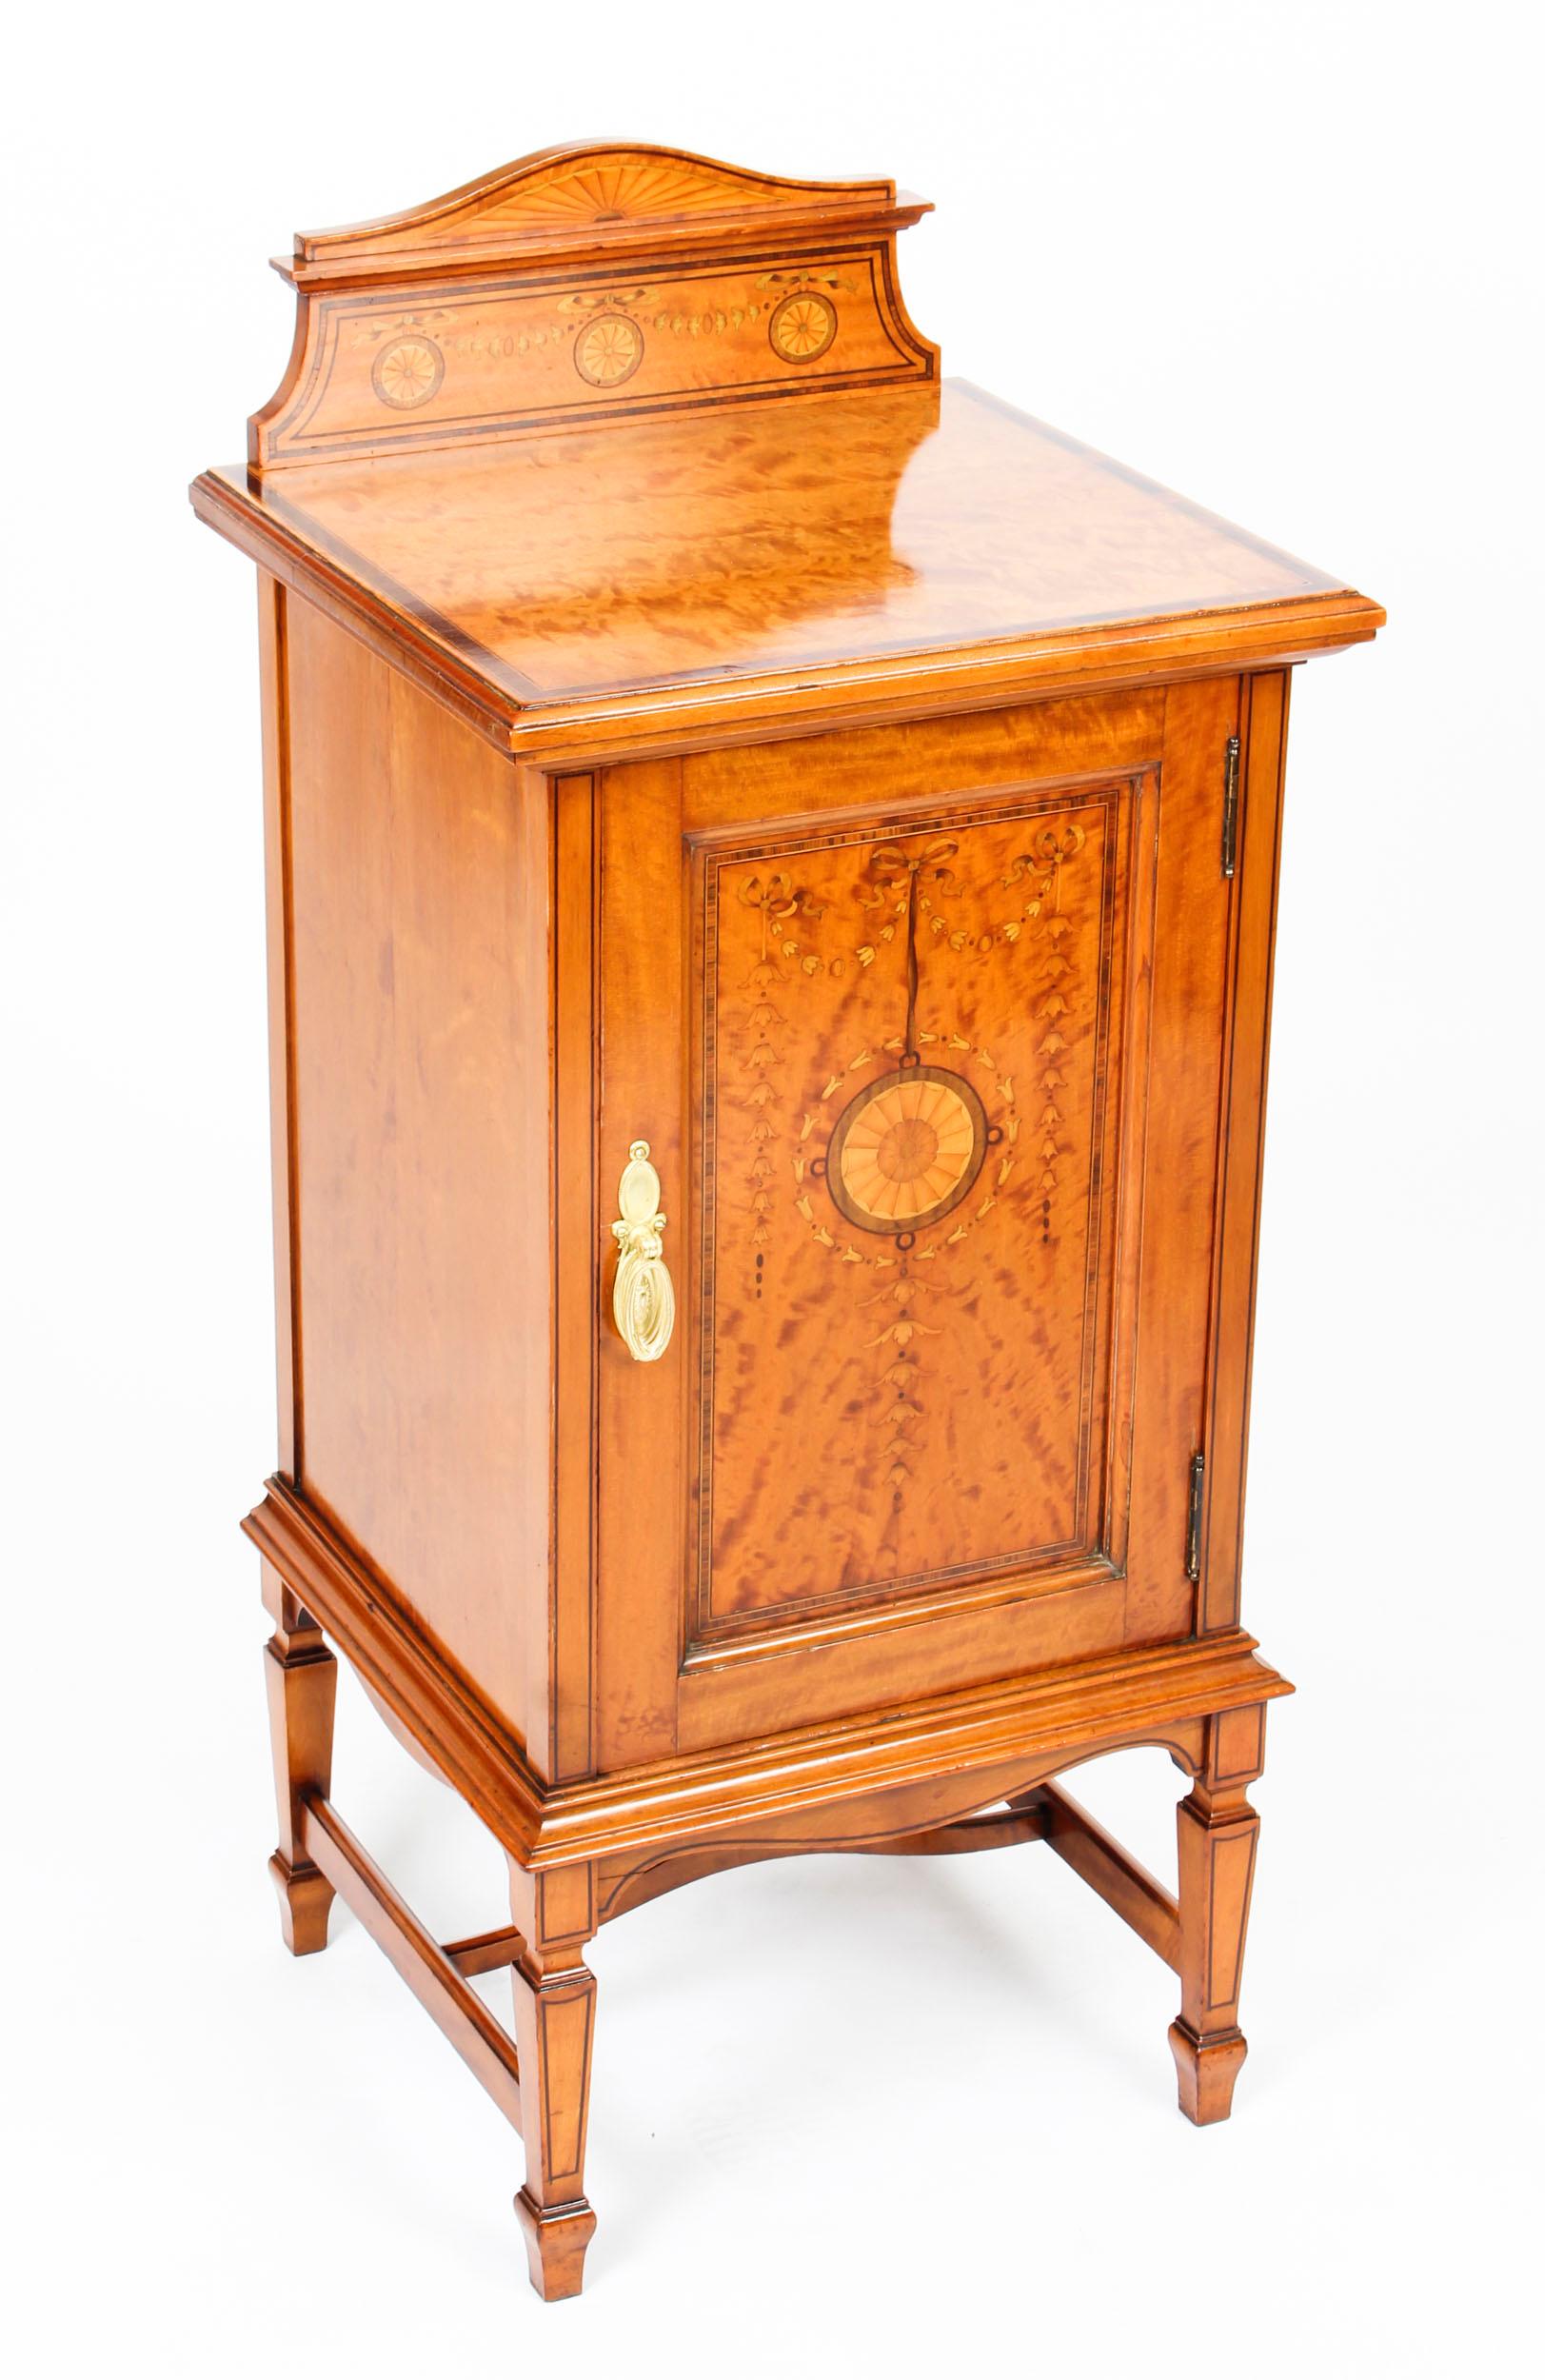 Antique Victorian Satinwood & Inlaid Bedside Cabinet, 19th Century For Sale 7